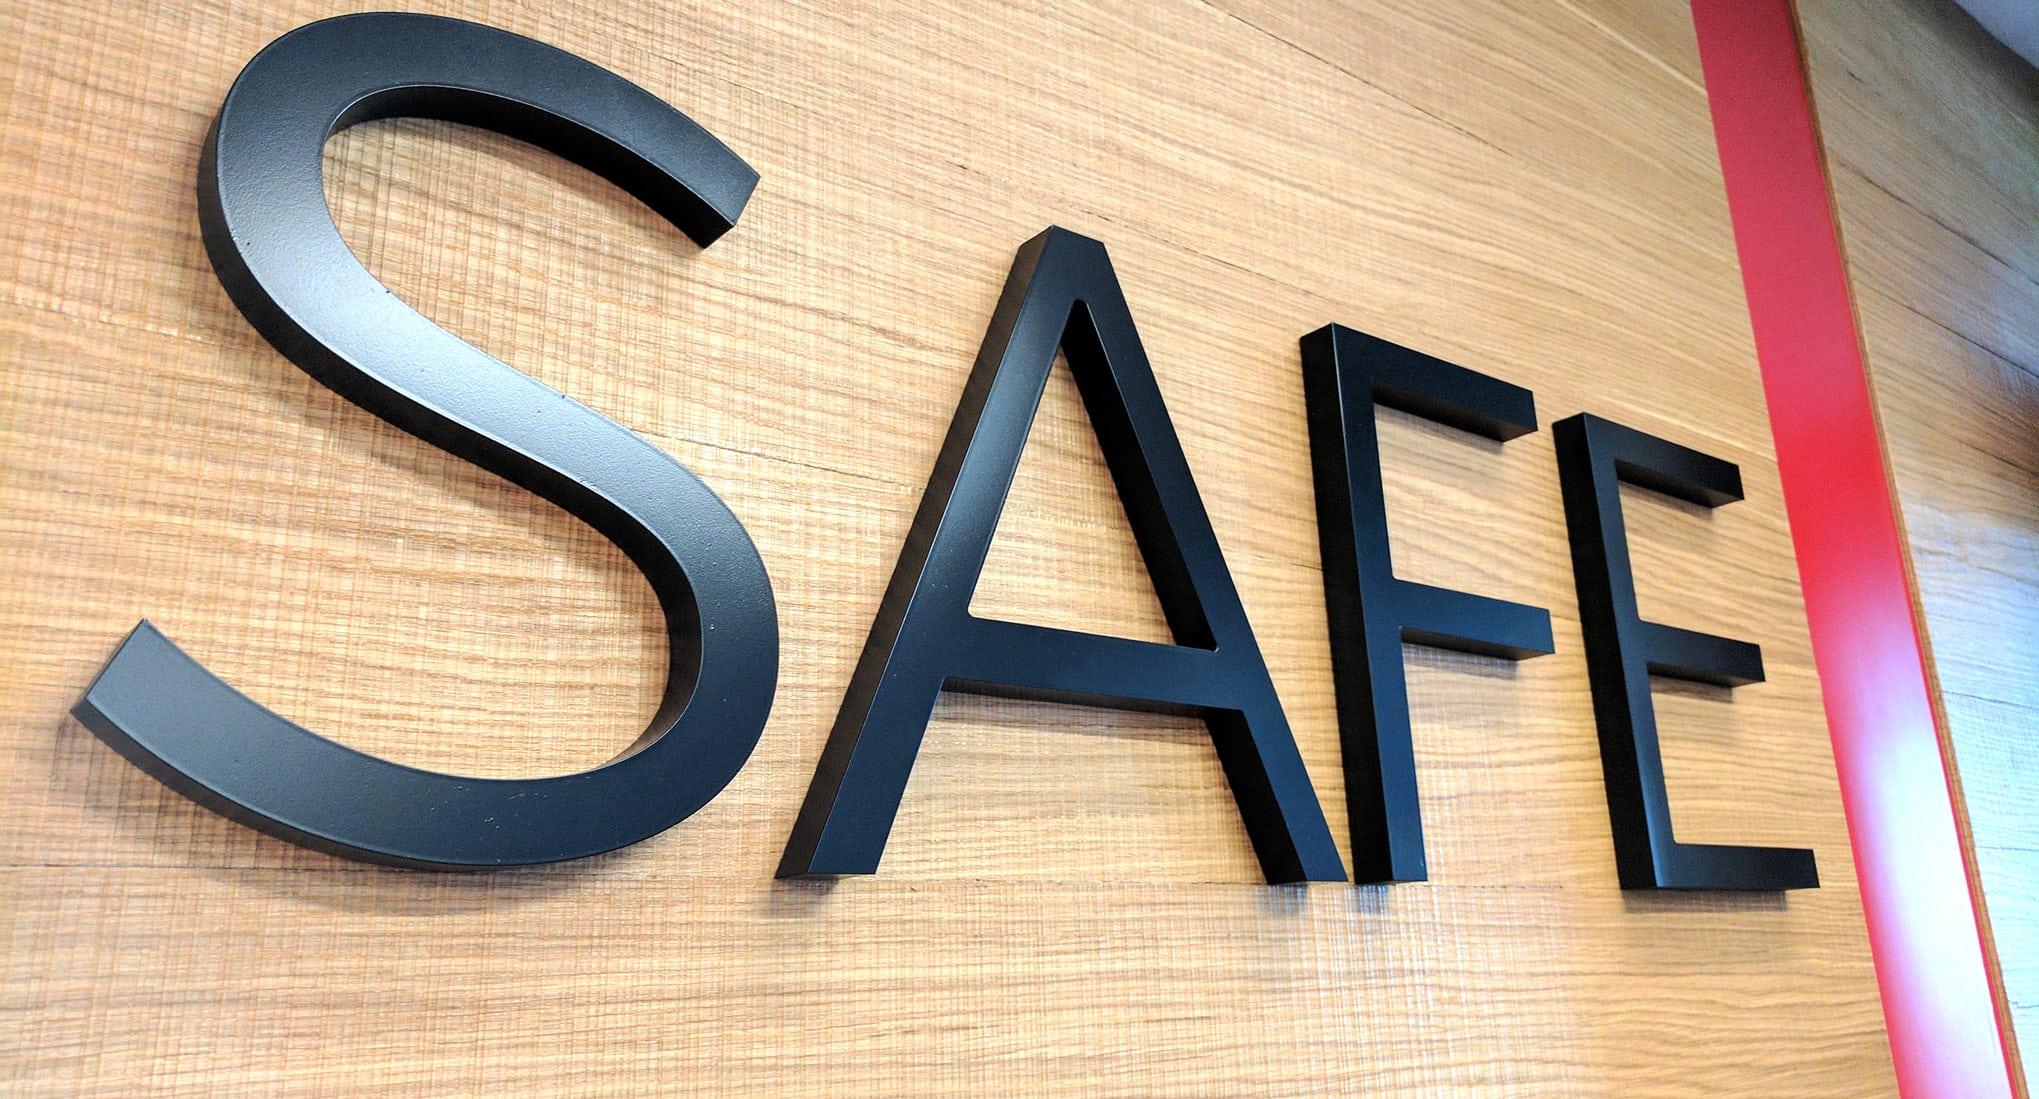 Image description: A photo of the SAFE logo on a wall. The word "SAFE" is in black letters next to a red line on the right. The wall is a light blonde wood.